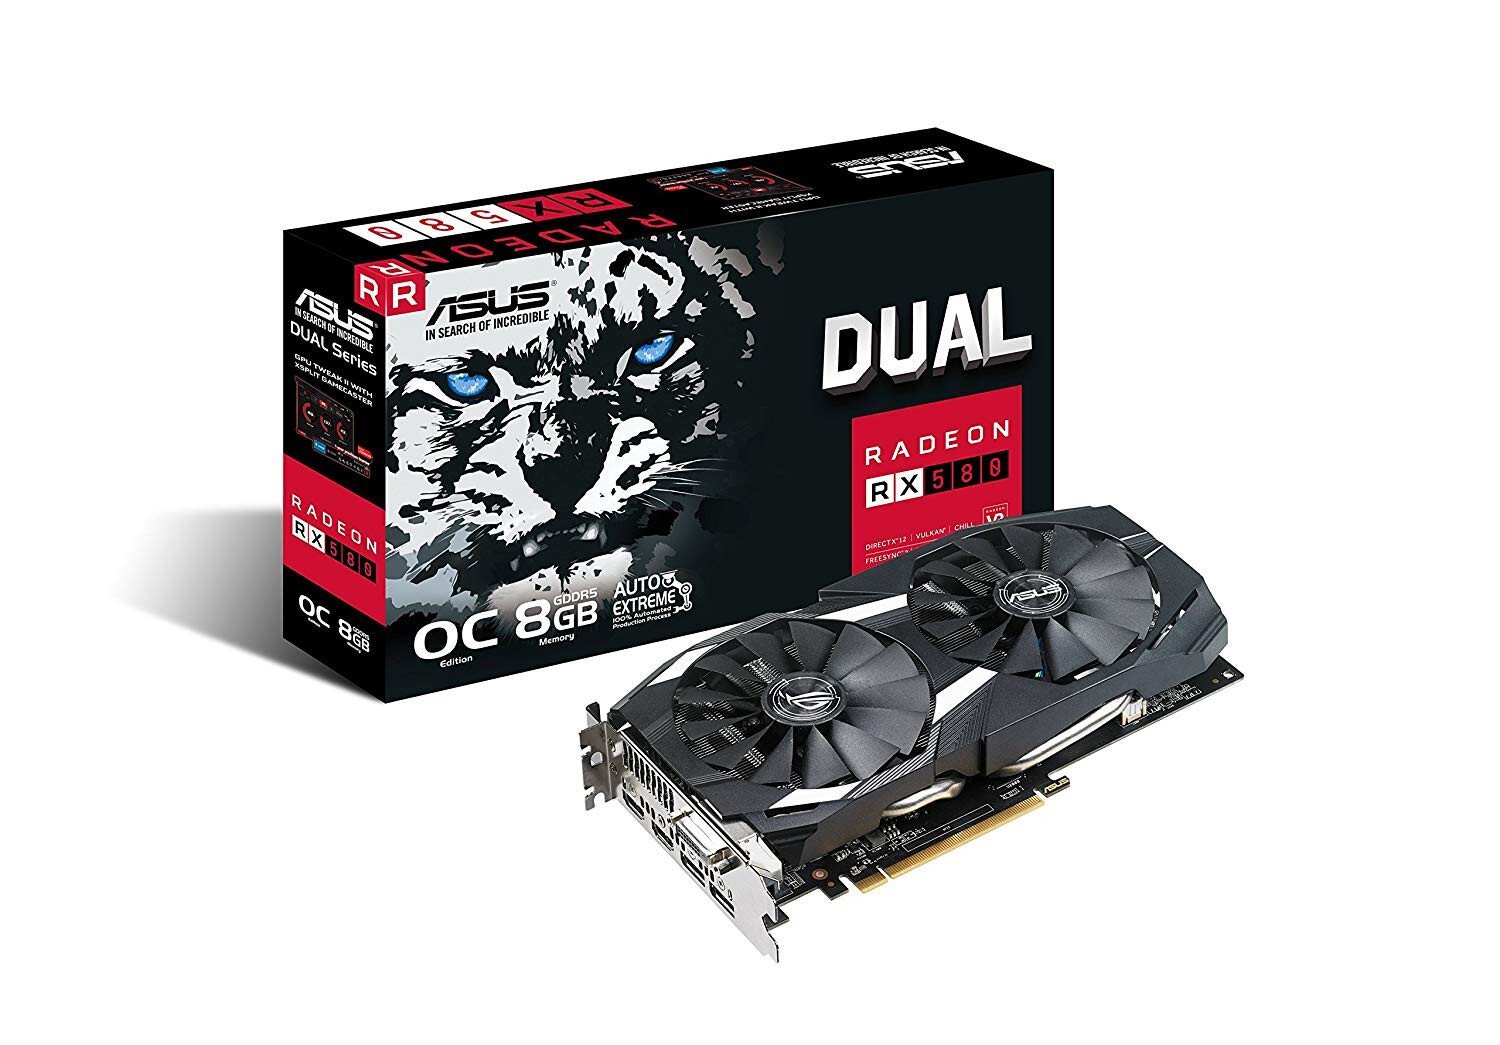 GOWENIC RX 580 Graphics Card， Gaming Graphics Card with 8GB GDDR5 Memory， DP，HD Multimedia Interface，DVI D Output Ports， PCI Express 3.0， 2 Cooling Fa